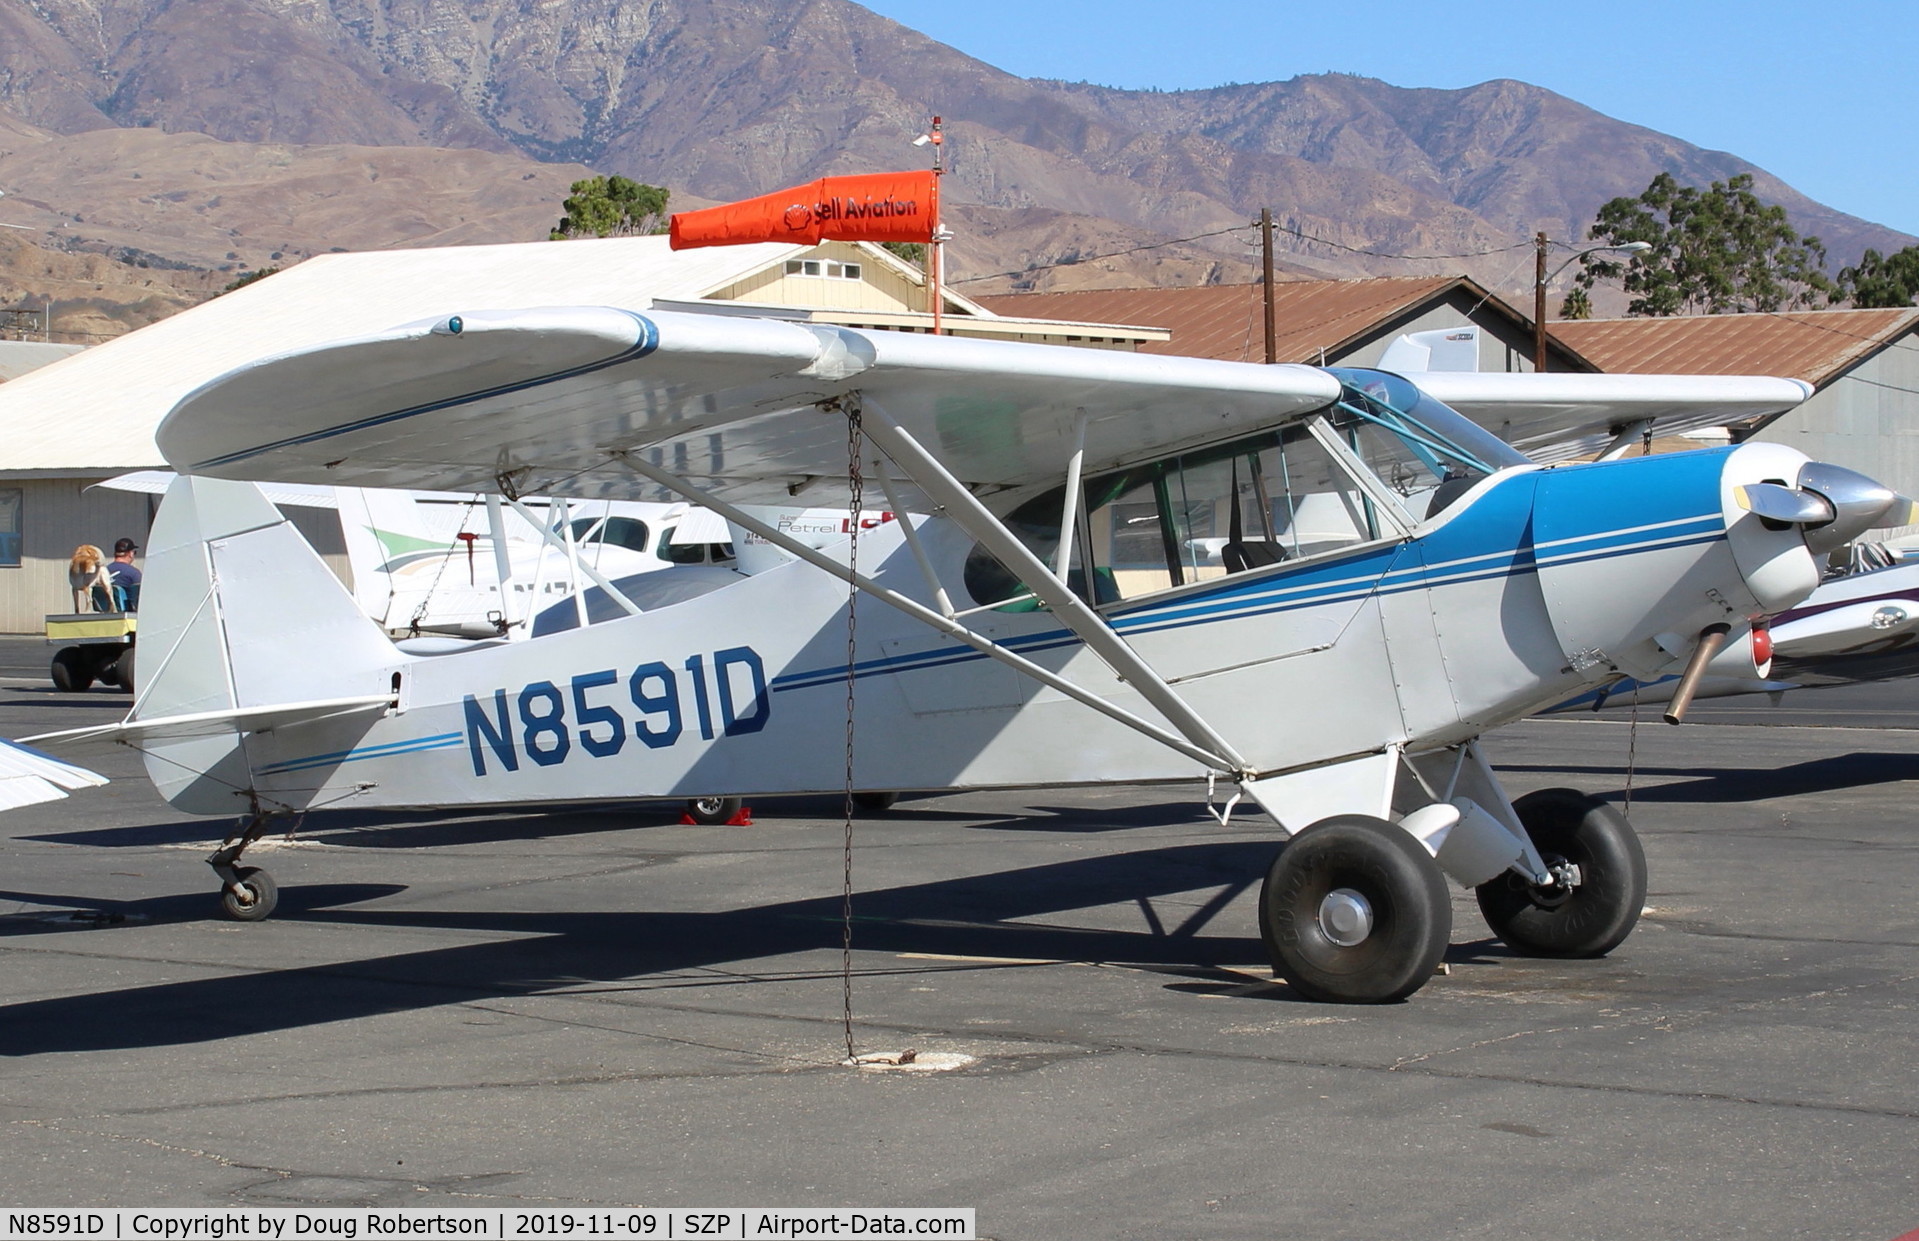 N8591D, 1958 Piper PA-18A Super Cub C/N 18-6251, 1958 Piper PA-18A SUPER CUB, Lycoming O-320 150 Hp, conversion from original 18A cropduster. All 18As were originally cropdusters.